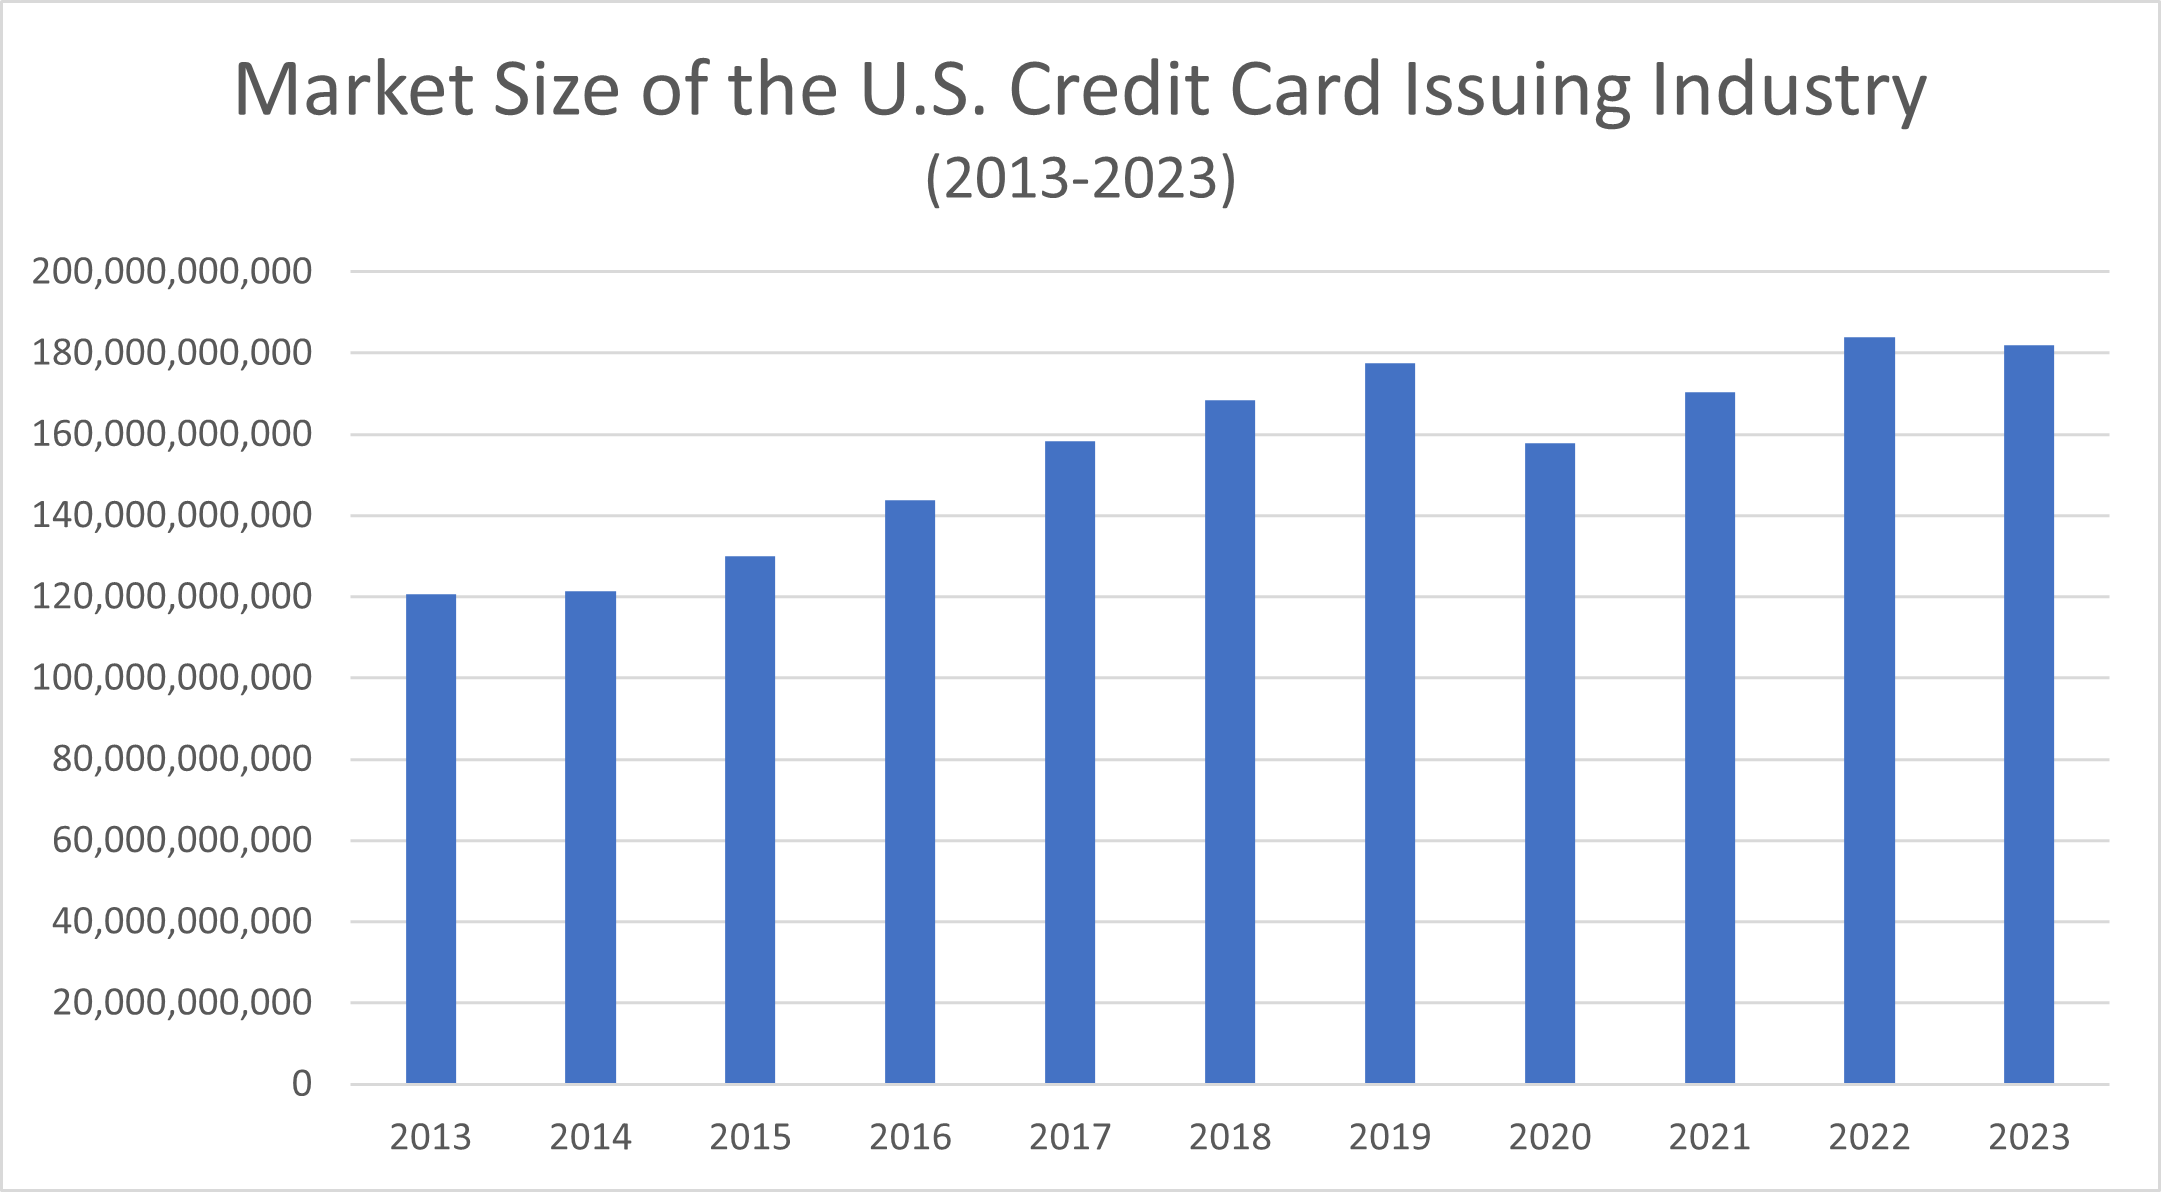 Market Size of the U.S. Credit Card Issuing Industry, 2013-2023